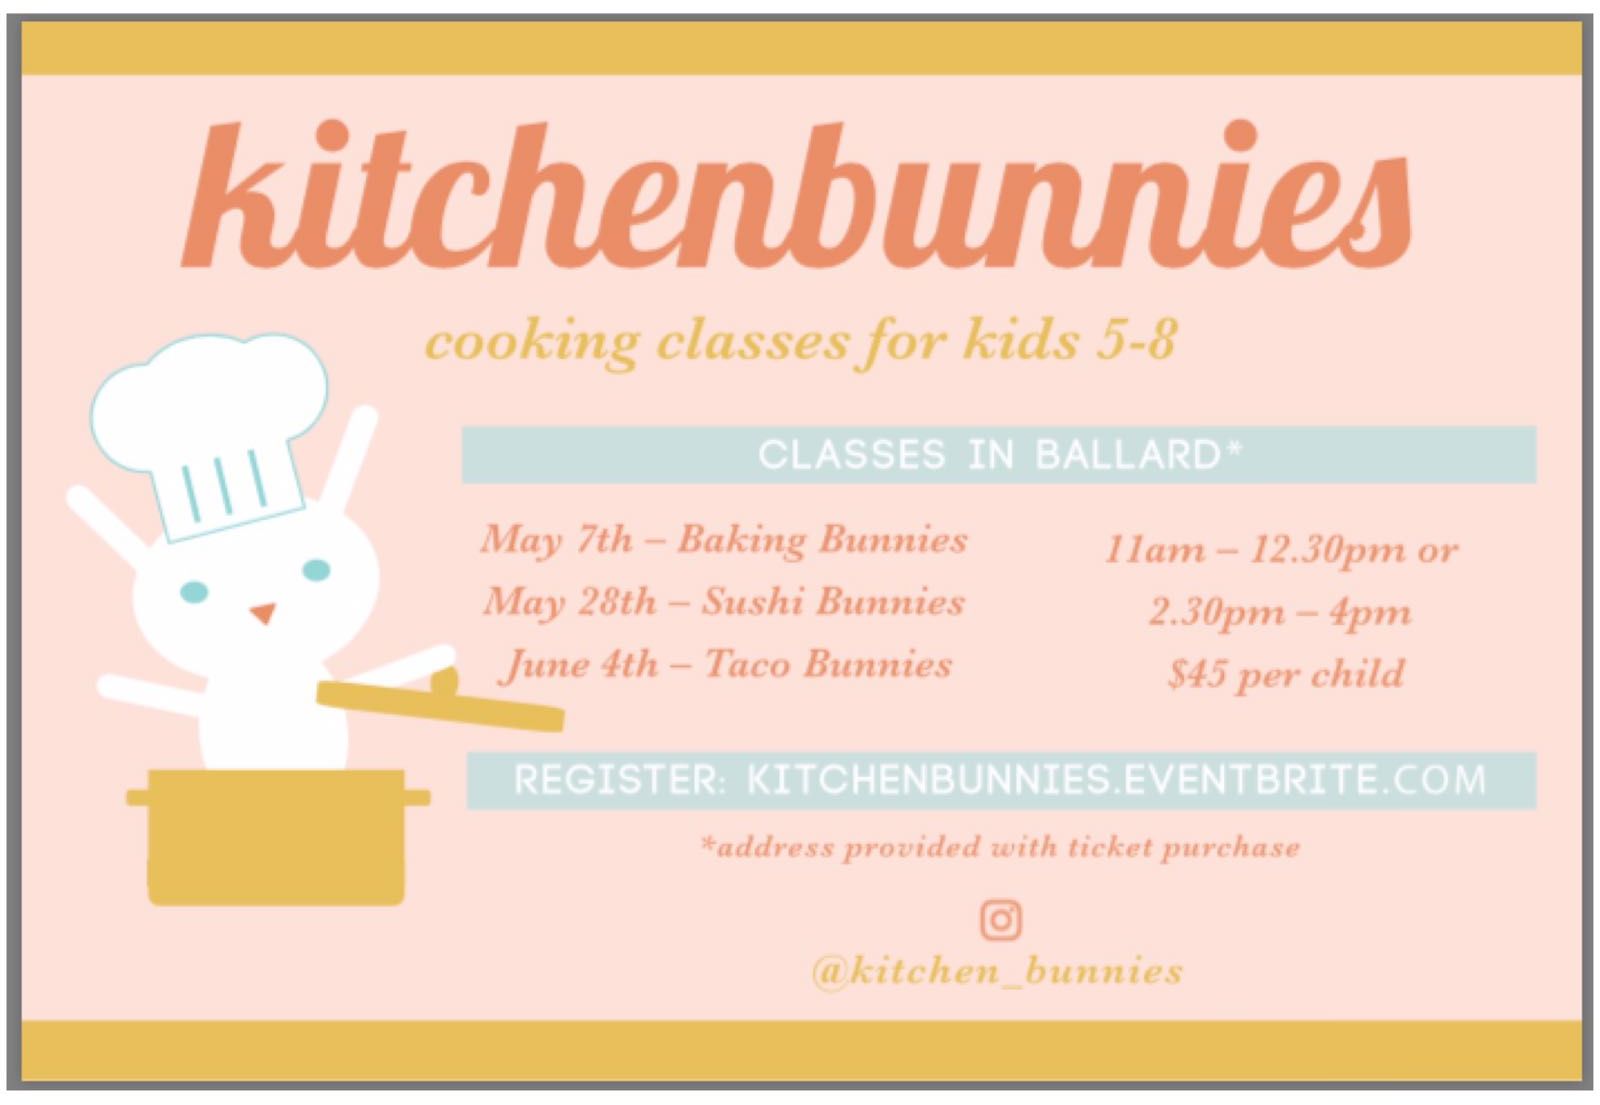 Want To Get Your Kids In The Kitchen?